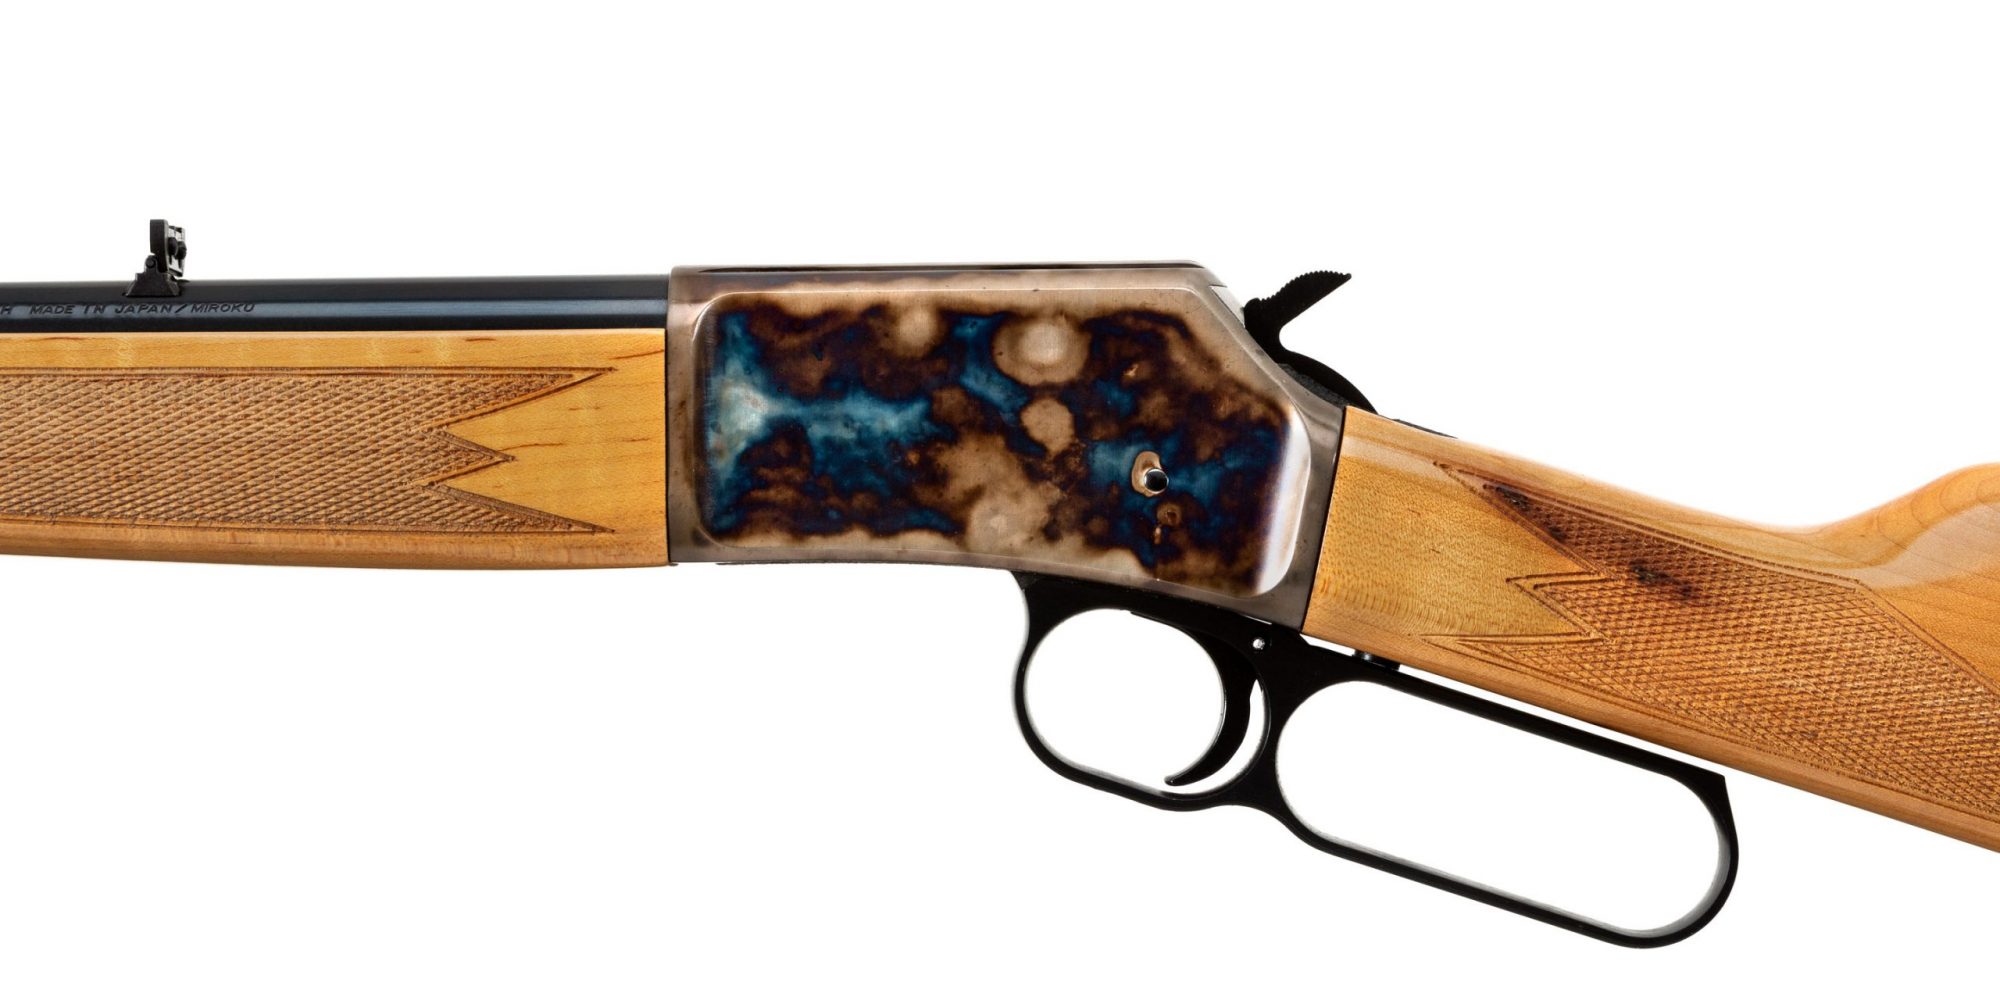 Photo of a Turnbull finished Browning BL-22 with upgraded maple stocks, featuring bone charcoal color case hardening by Turnbull Restoration of Bloomfield, NY